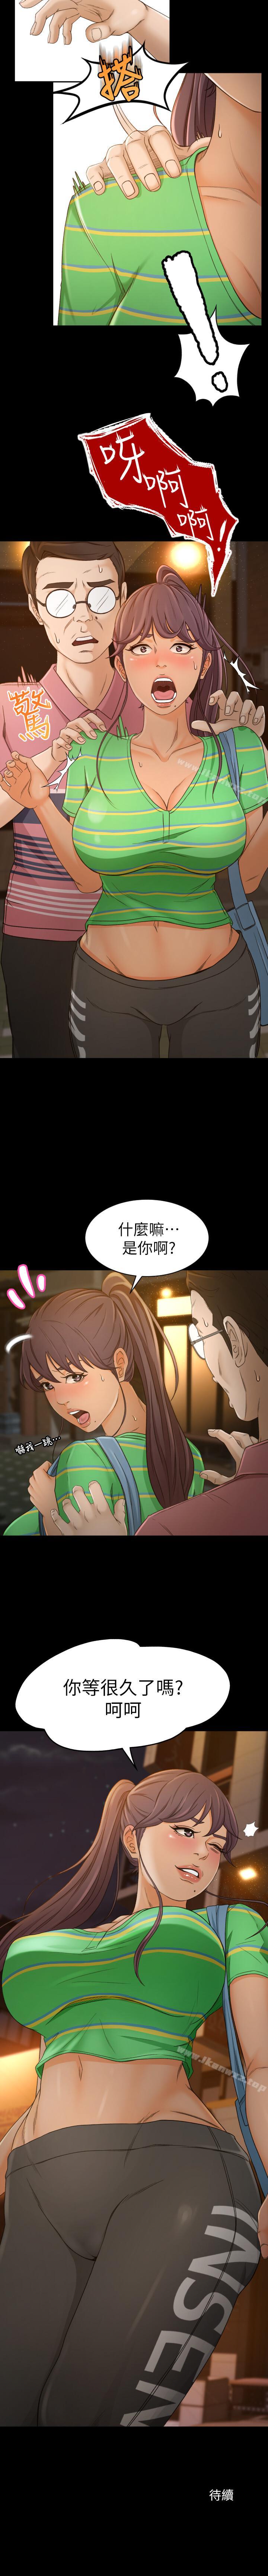 Ejaculations 超會賣女業務 1-30 Transsexual - Page 9